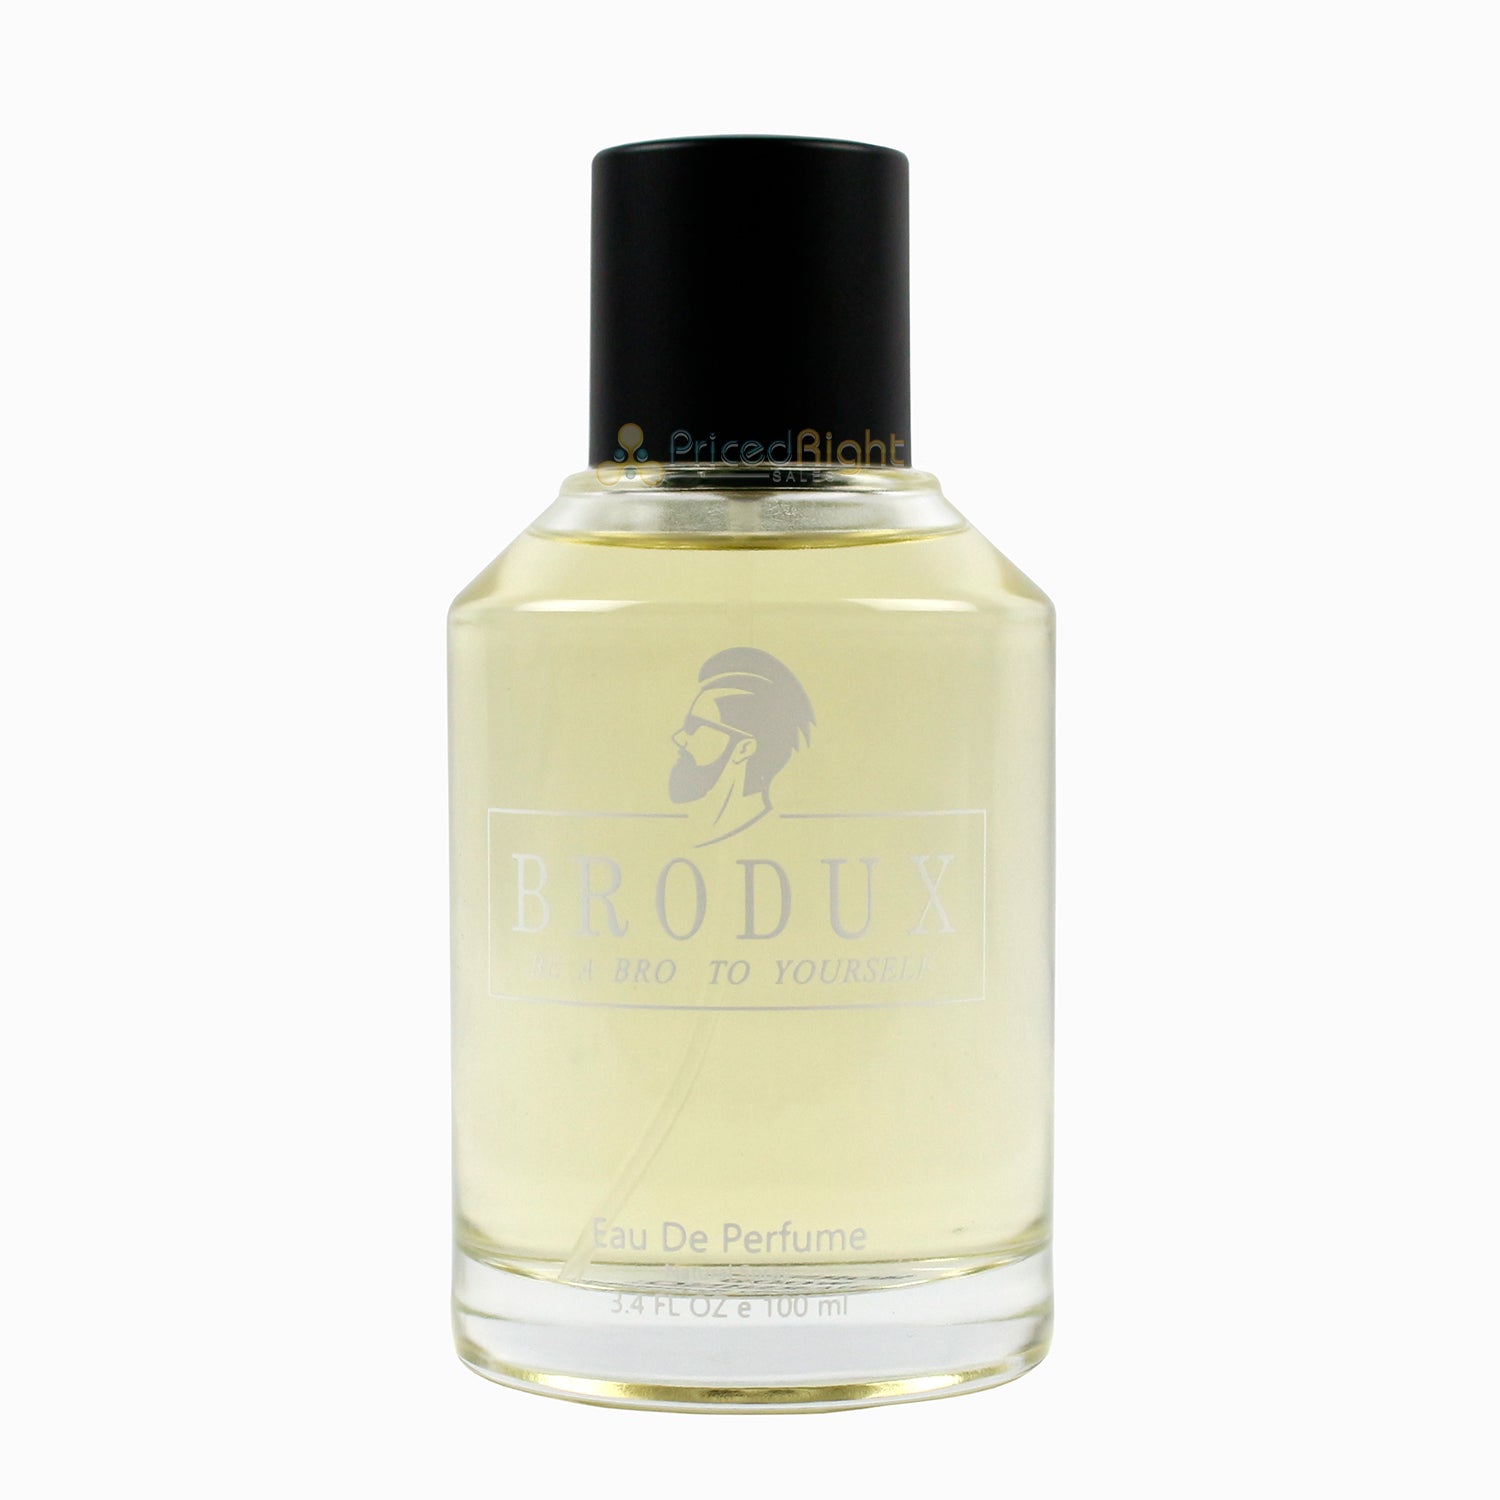 BroDux Morning Wood Handcrafted High Quality Natural Cologne 3.4 oz Spray Bottle